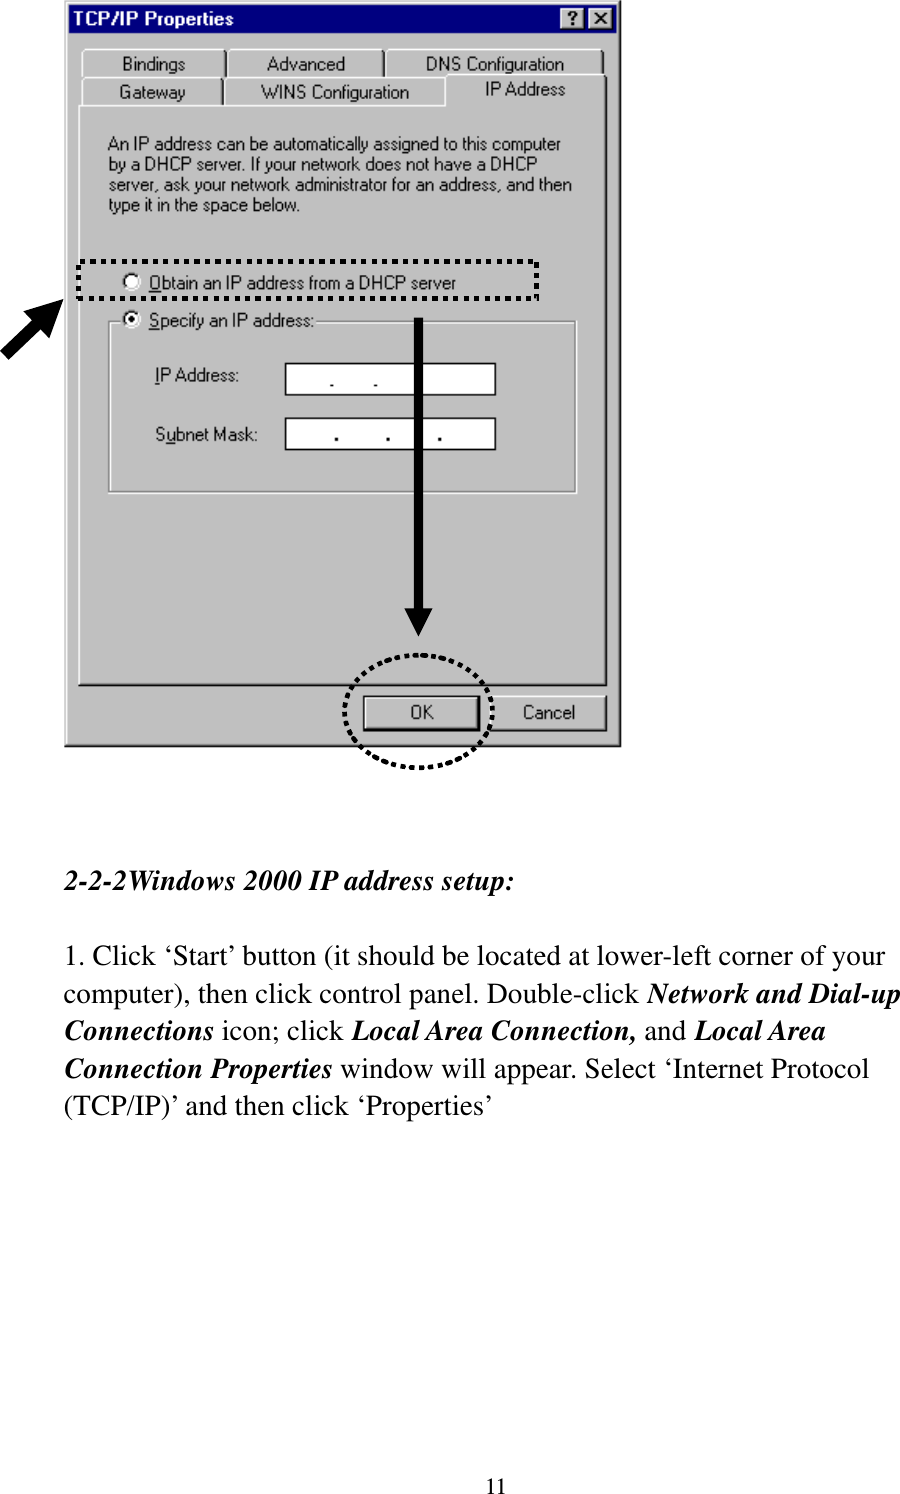 11     2-2-2Windows 2000 IP address setup:  1. Click ‘Start’ button (it should be located at lower-left corner of your computer), then click control panel. Double-click Network and Dial-up Connections icon; click Local Area Connection, and Local Area Connection Properties window will appear. Select ‘Internet Protocol (TCP/IP)’ and then click ‘Properties’    